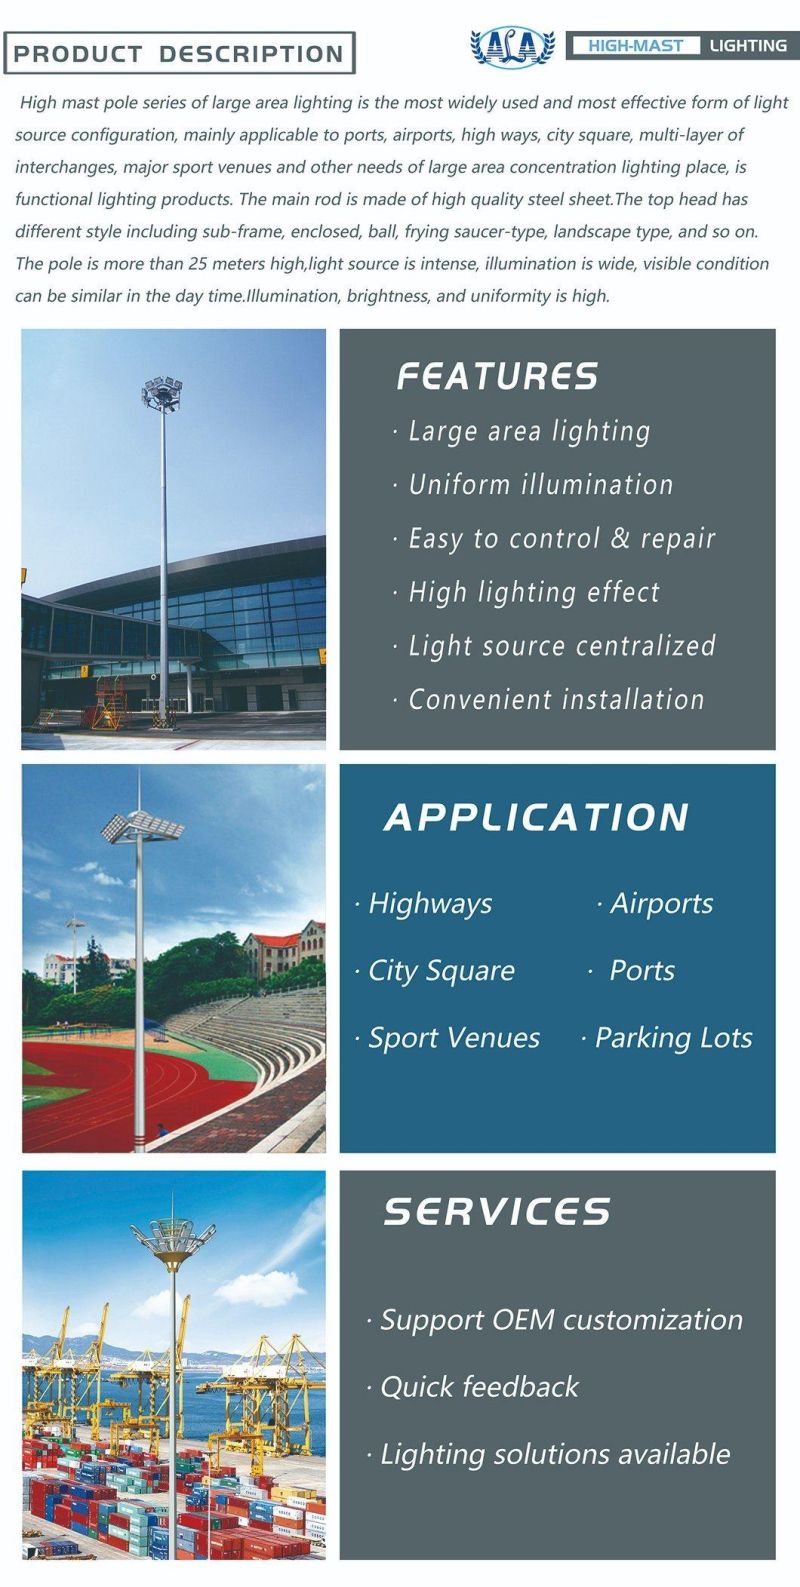 Ala Newest 500W-1000W CE Certified Flood LED Lamp High Mast Light Applicable to City Square, Station, Wharf, Highway, Stadium, Overpass